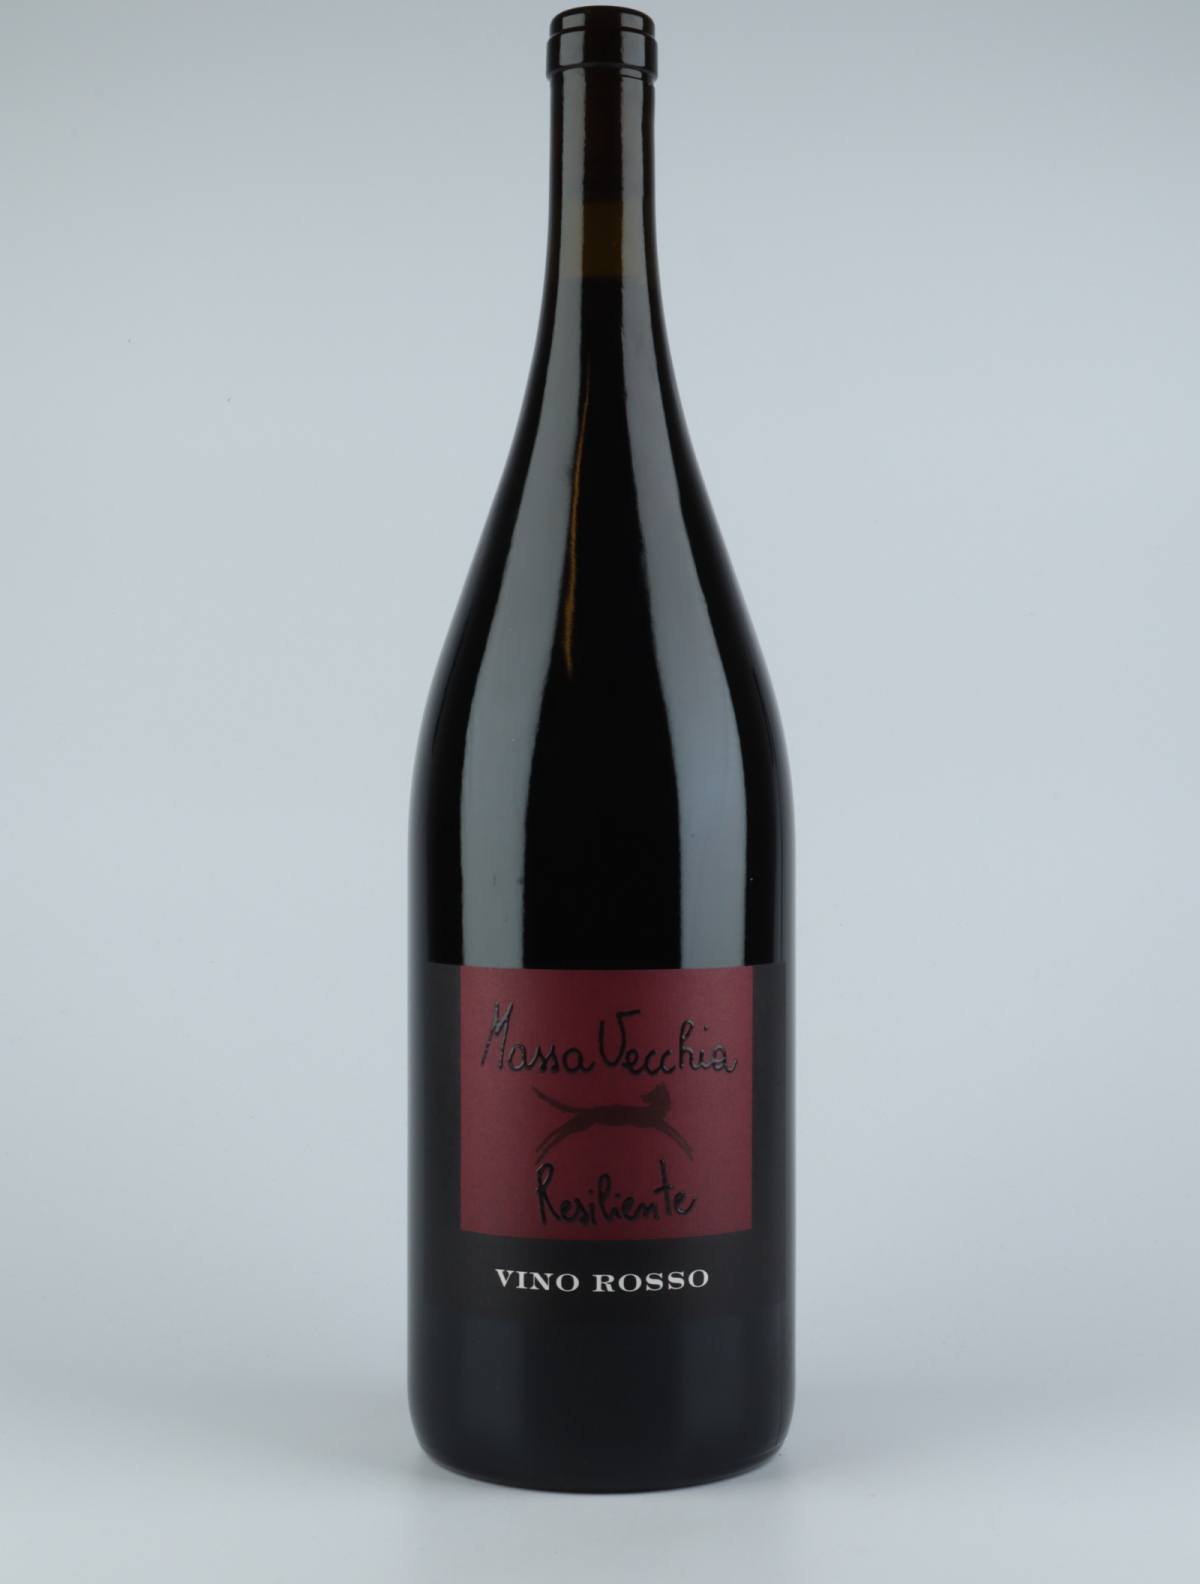 A bottle N.V. Resiliente Rosso Red wine from Massa Vecchia, Tuscany in Italy